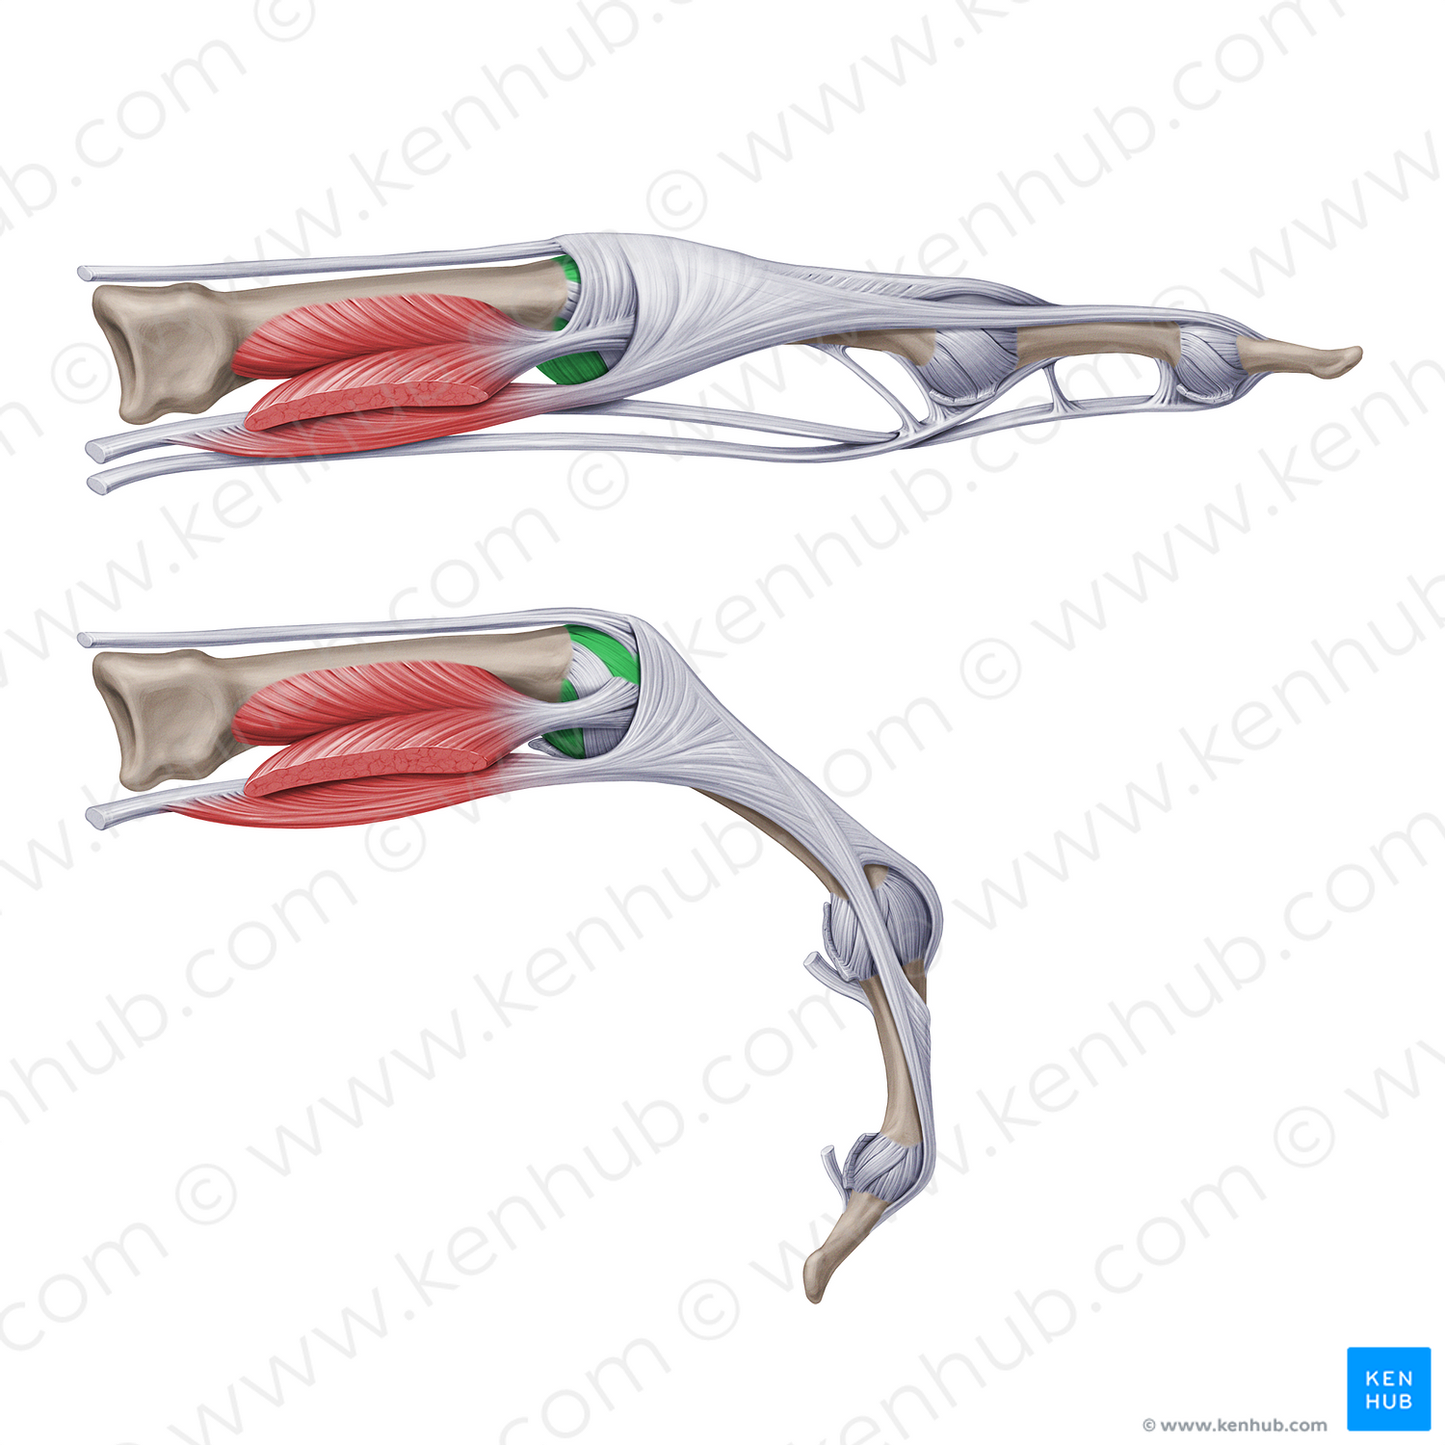 Accessory collateral metacarpophalangeal ligaments (#20947)